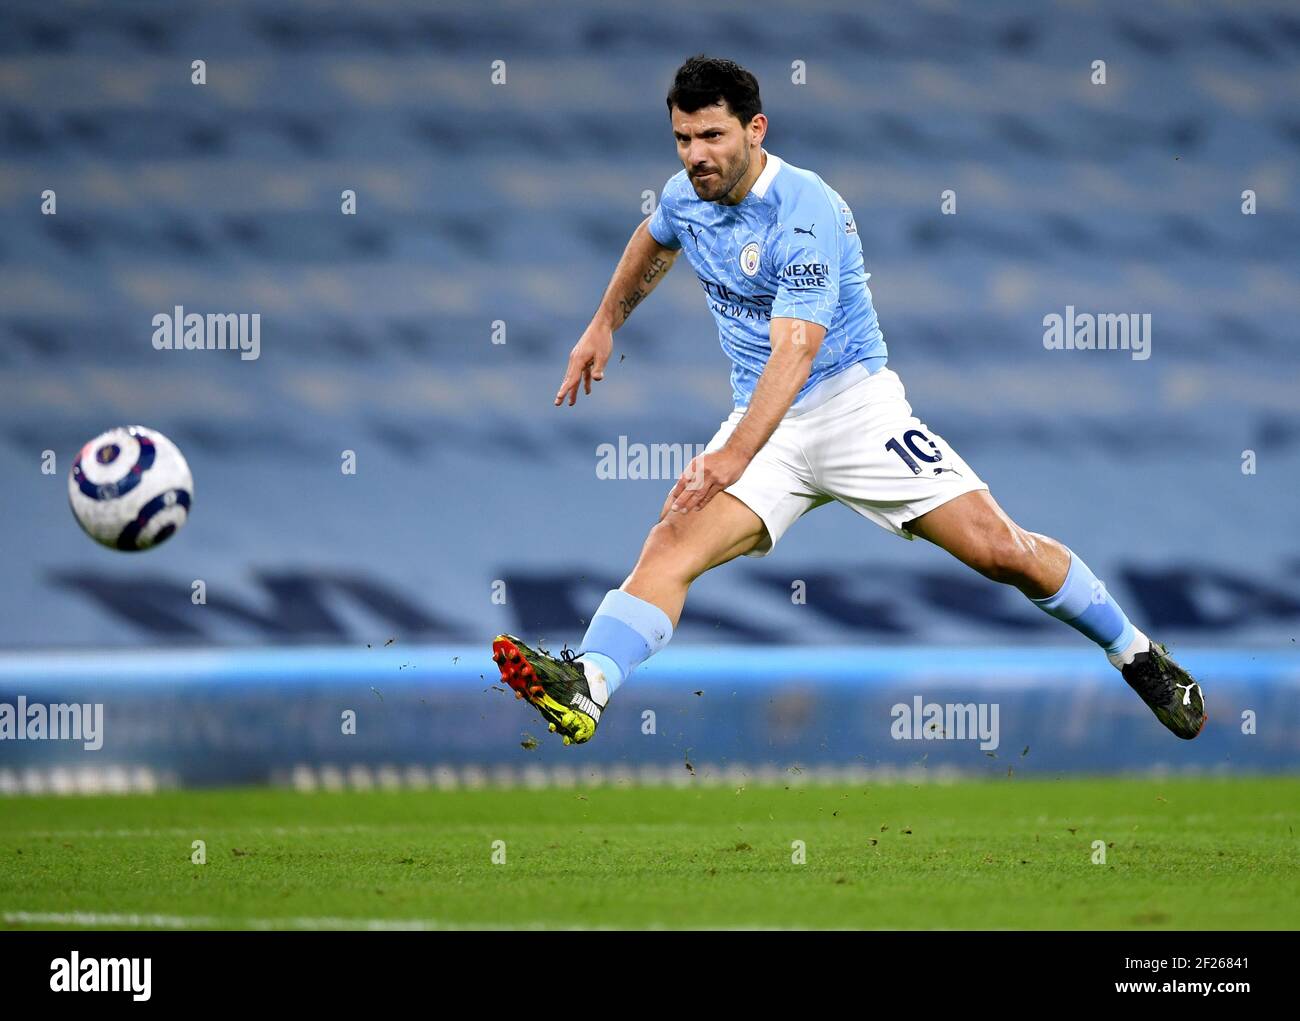 Manchester City's Sergio Aguero has a shot on goal during the Premier League match at the Etihad Stadium, Manchester. Picture date: Wednesday March 10, 2021. Stock Photo